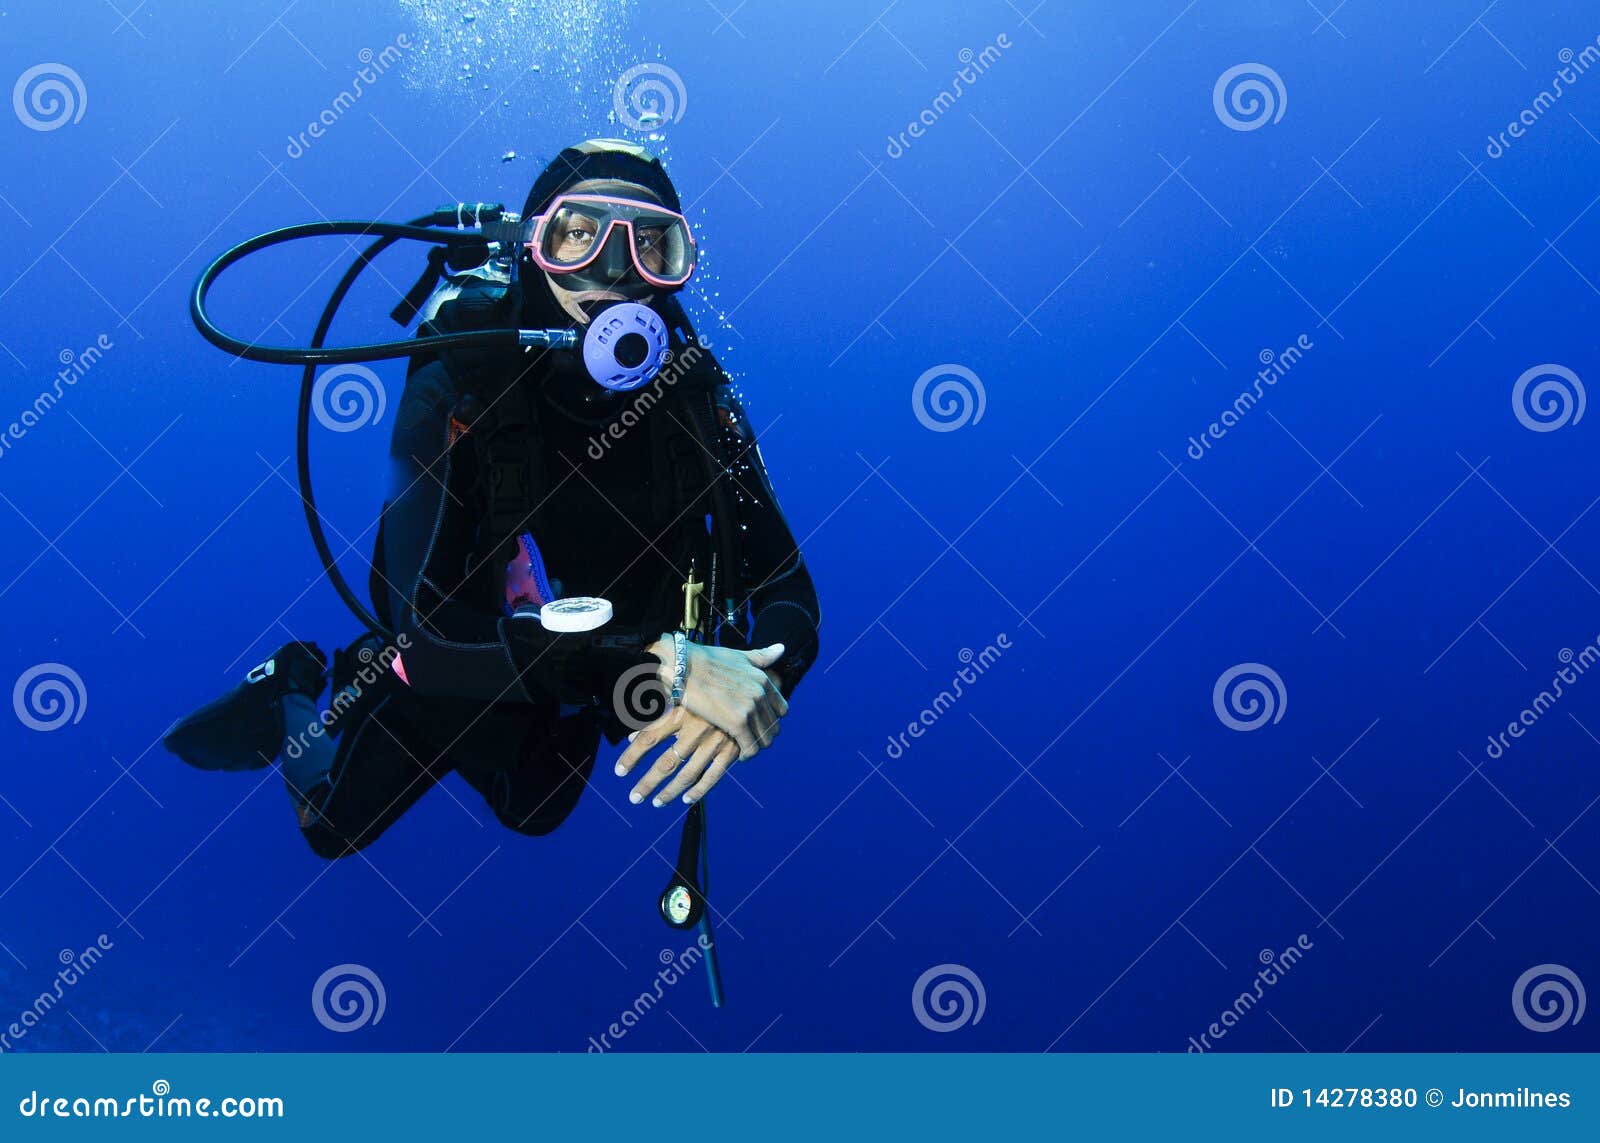 scuba diving in clear blue water